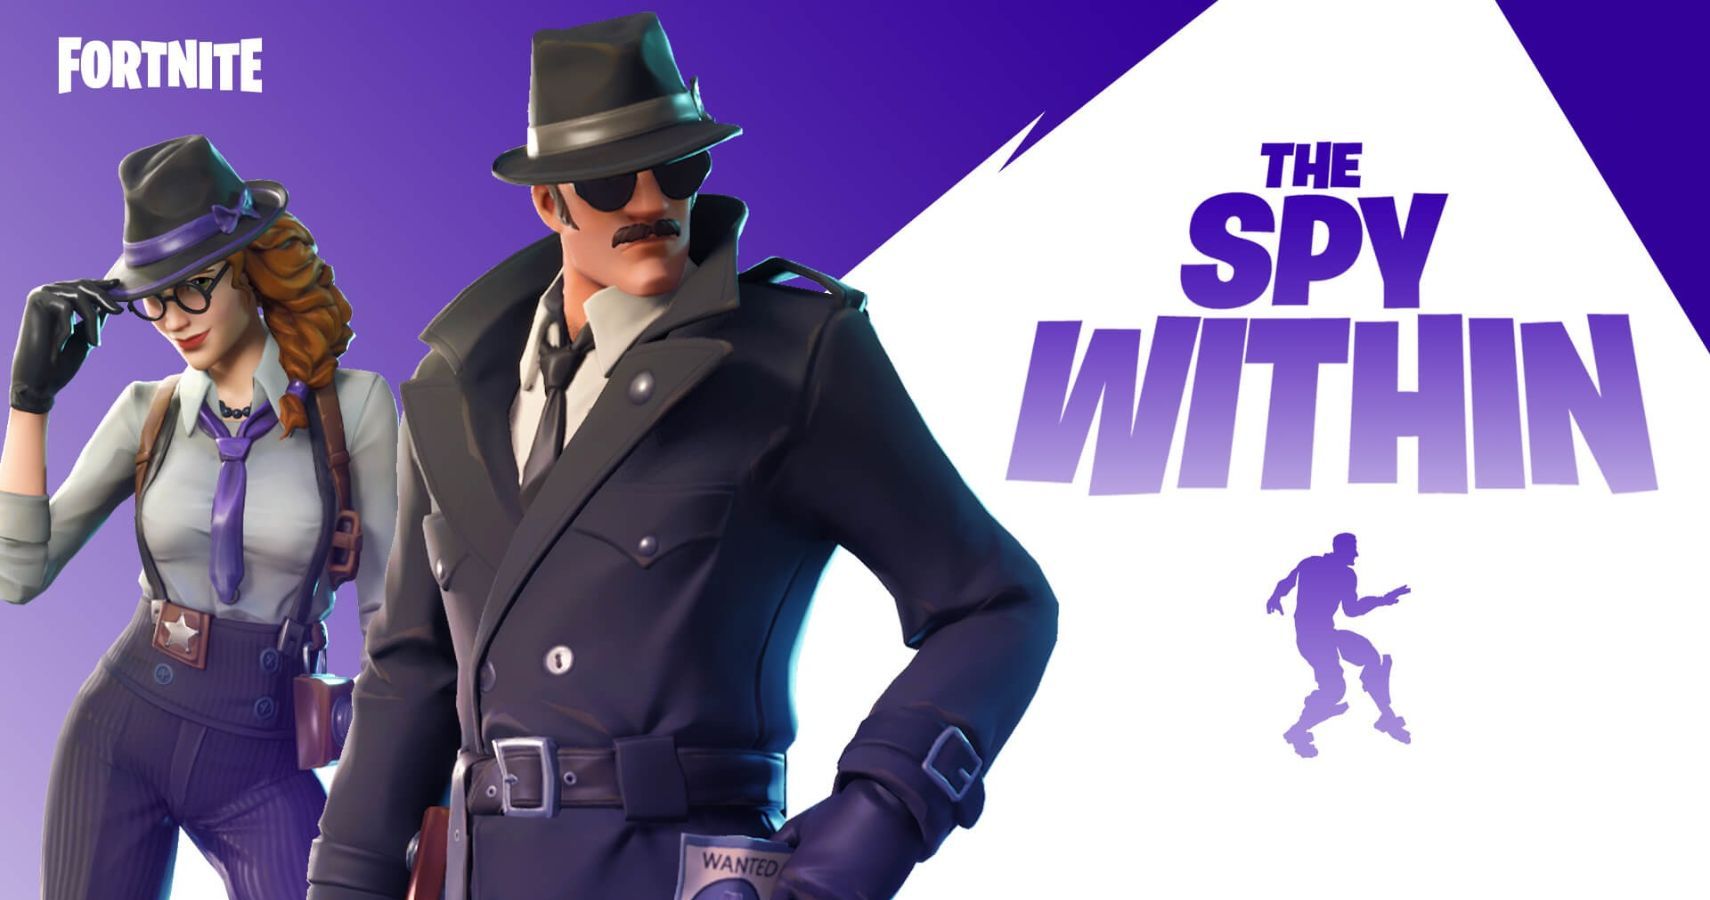 Fortnite Adds The Spy Within LimitedTime Mode (And Its Exactly Like Among Us)